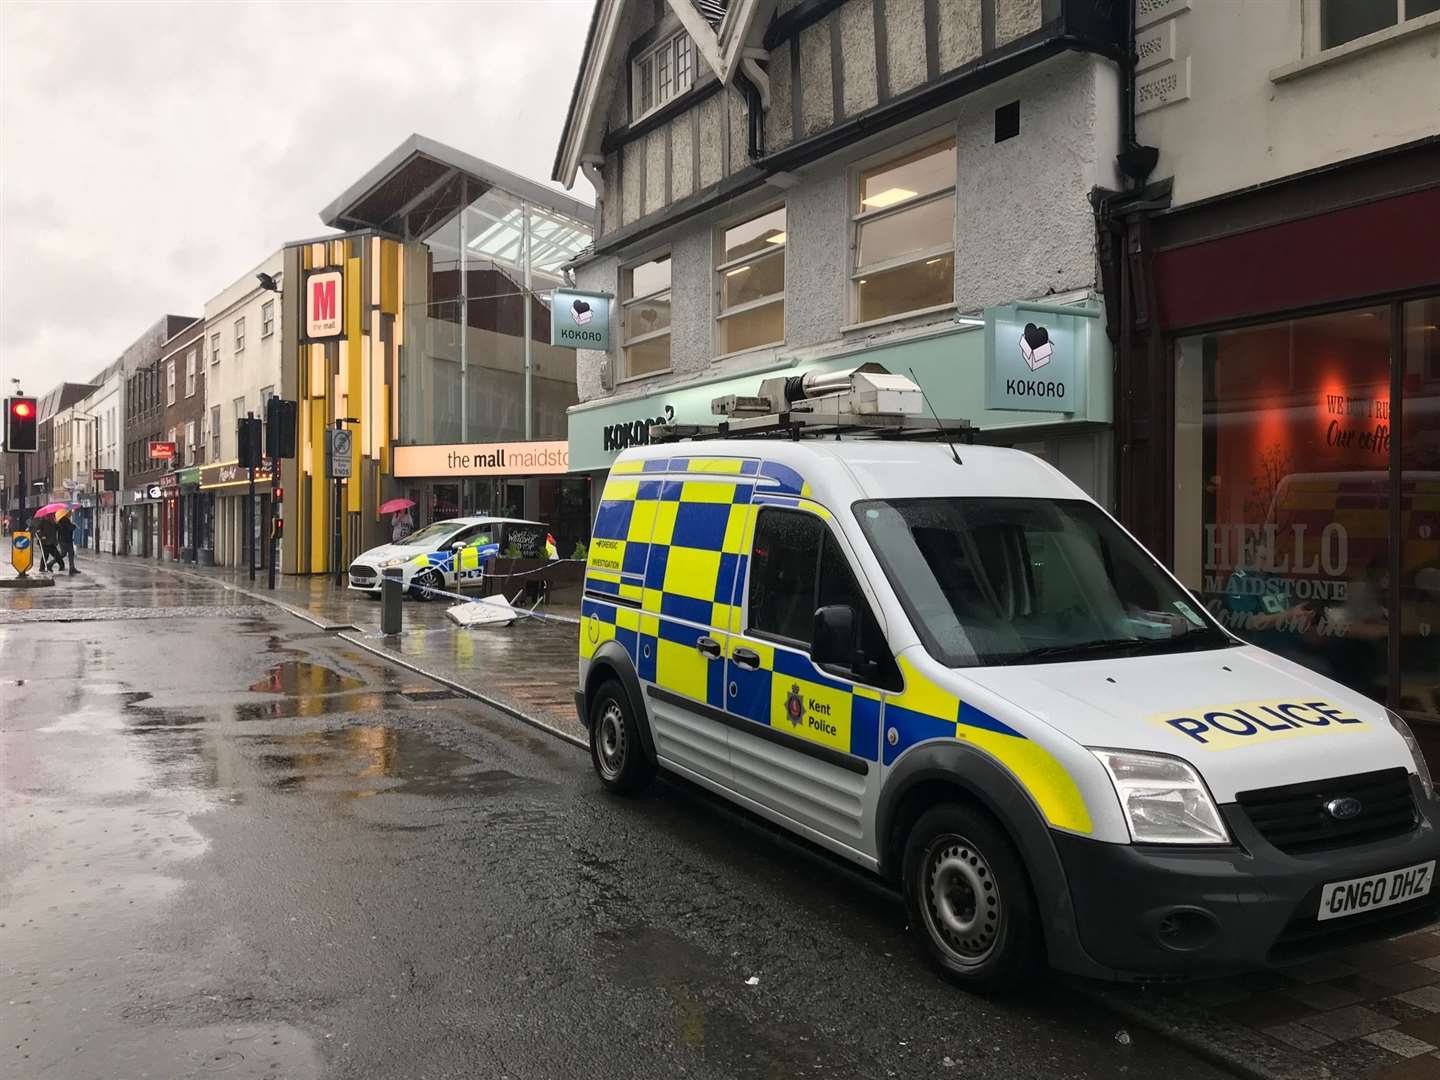 Police cordoned off the entrance to Dusk 2 Dawn in Maidstone following an attack last September